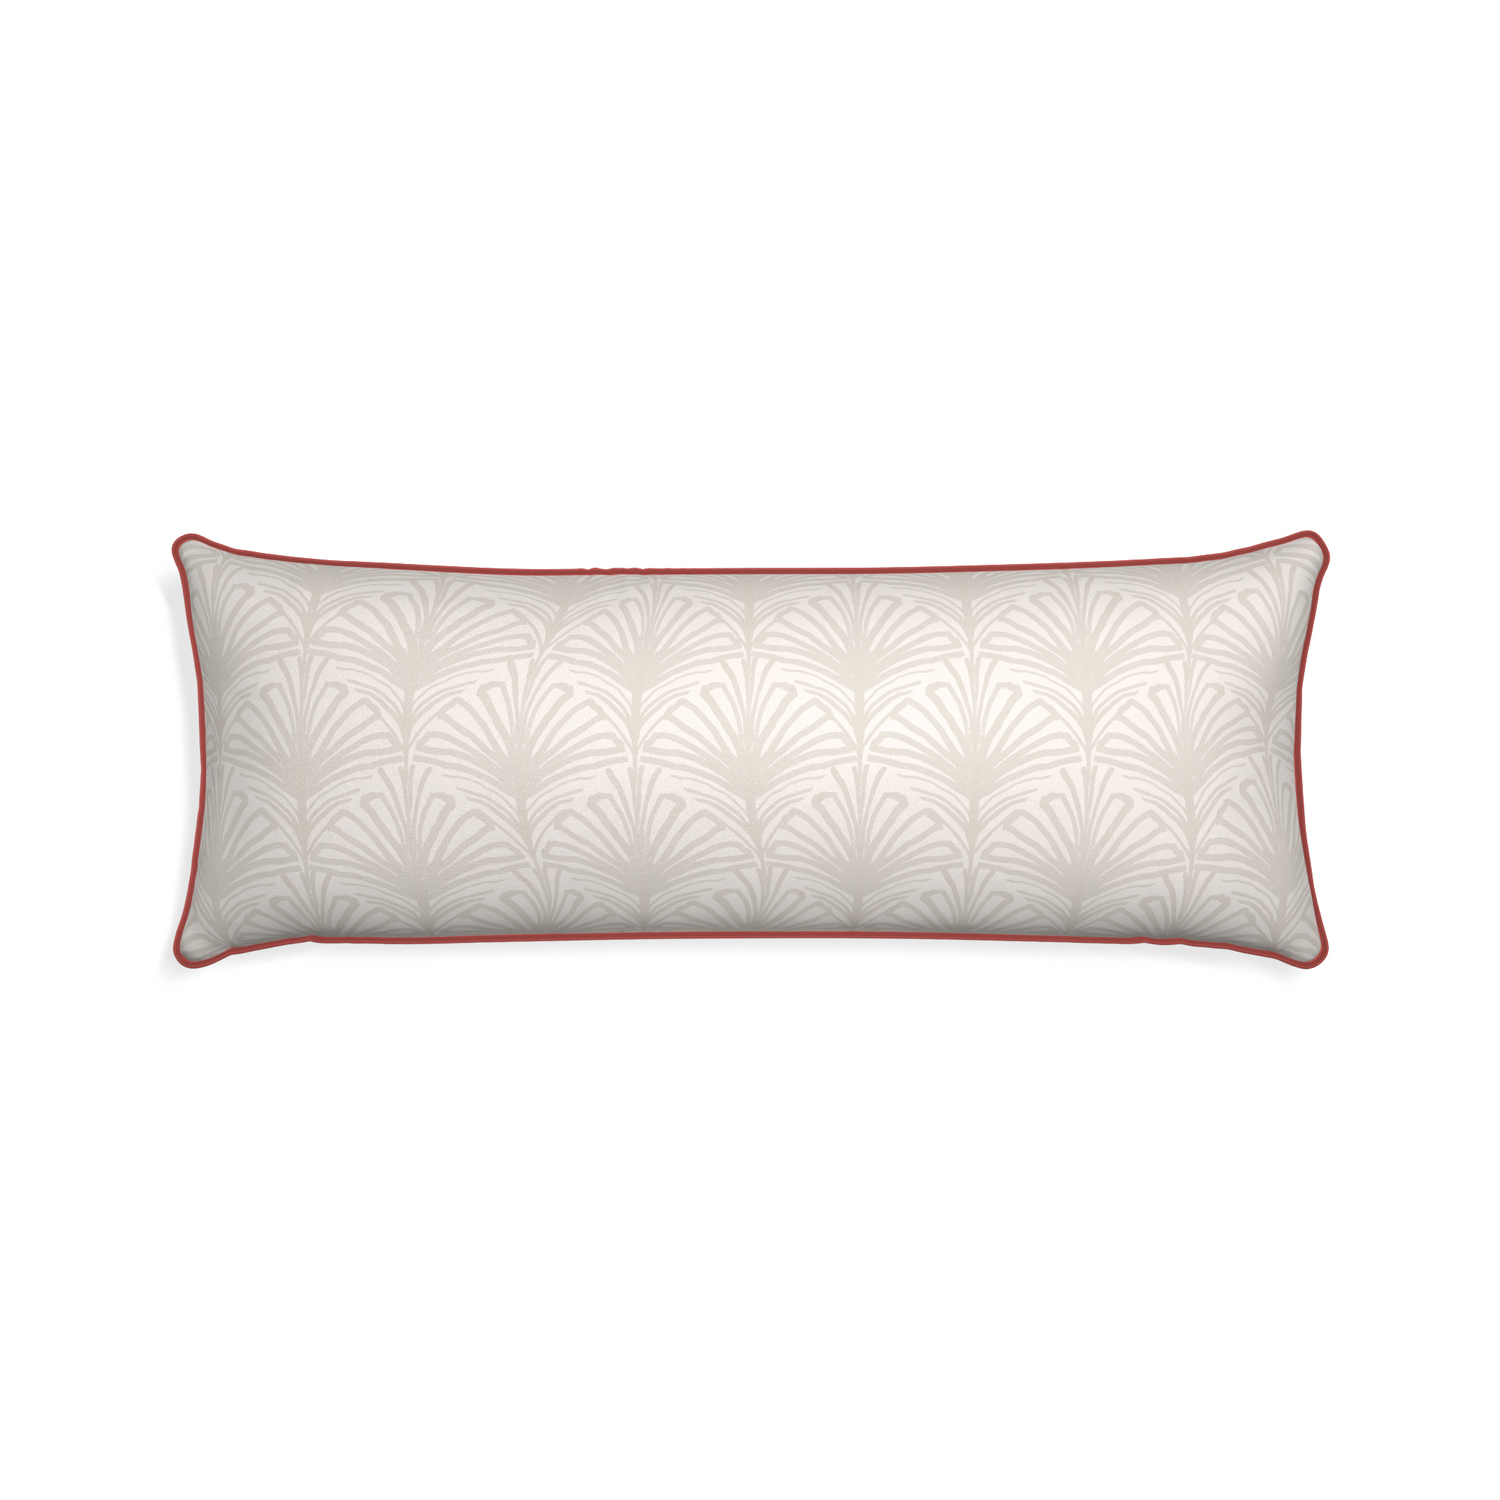 Xl-lumbar suzy sand custom pillow with c piping on white background